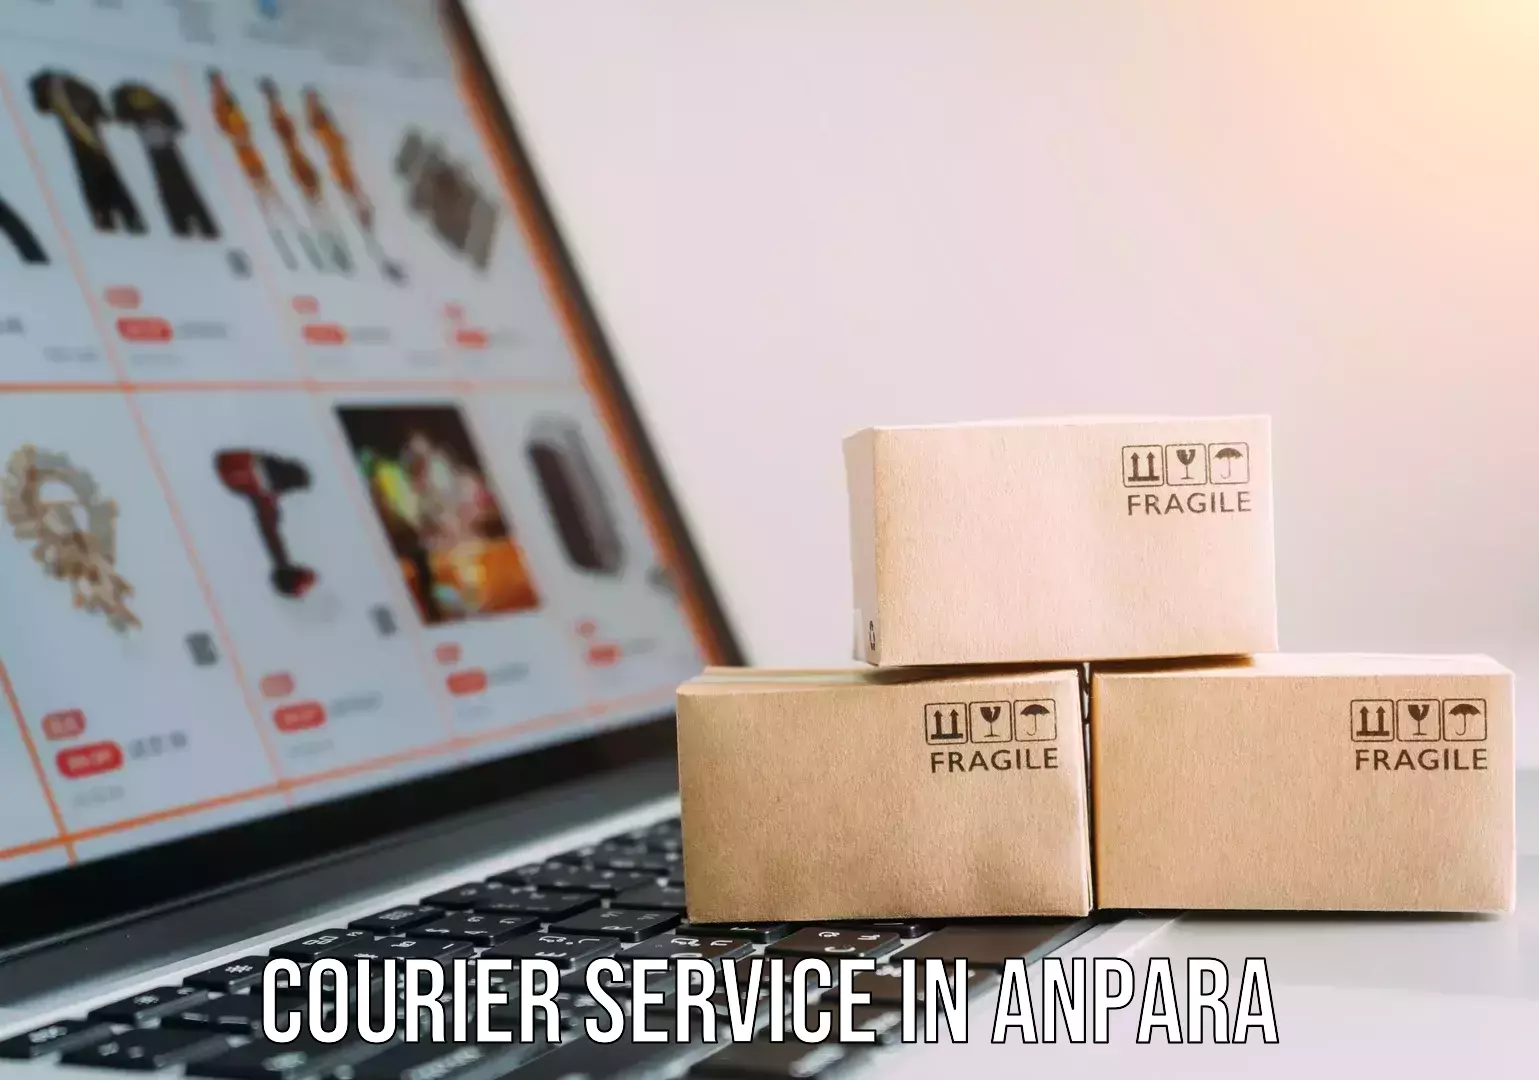 Expedited parcel delivery in Anpara